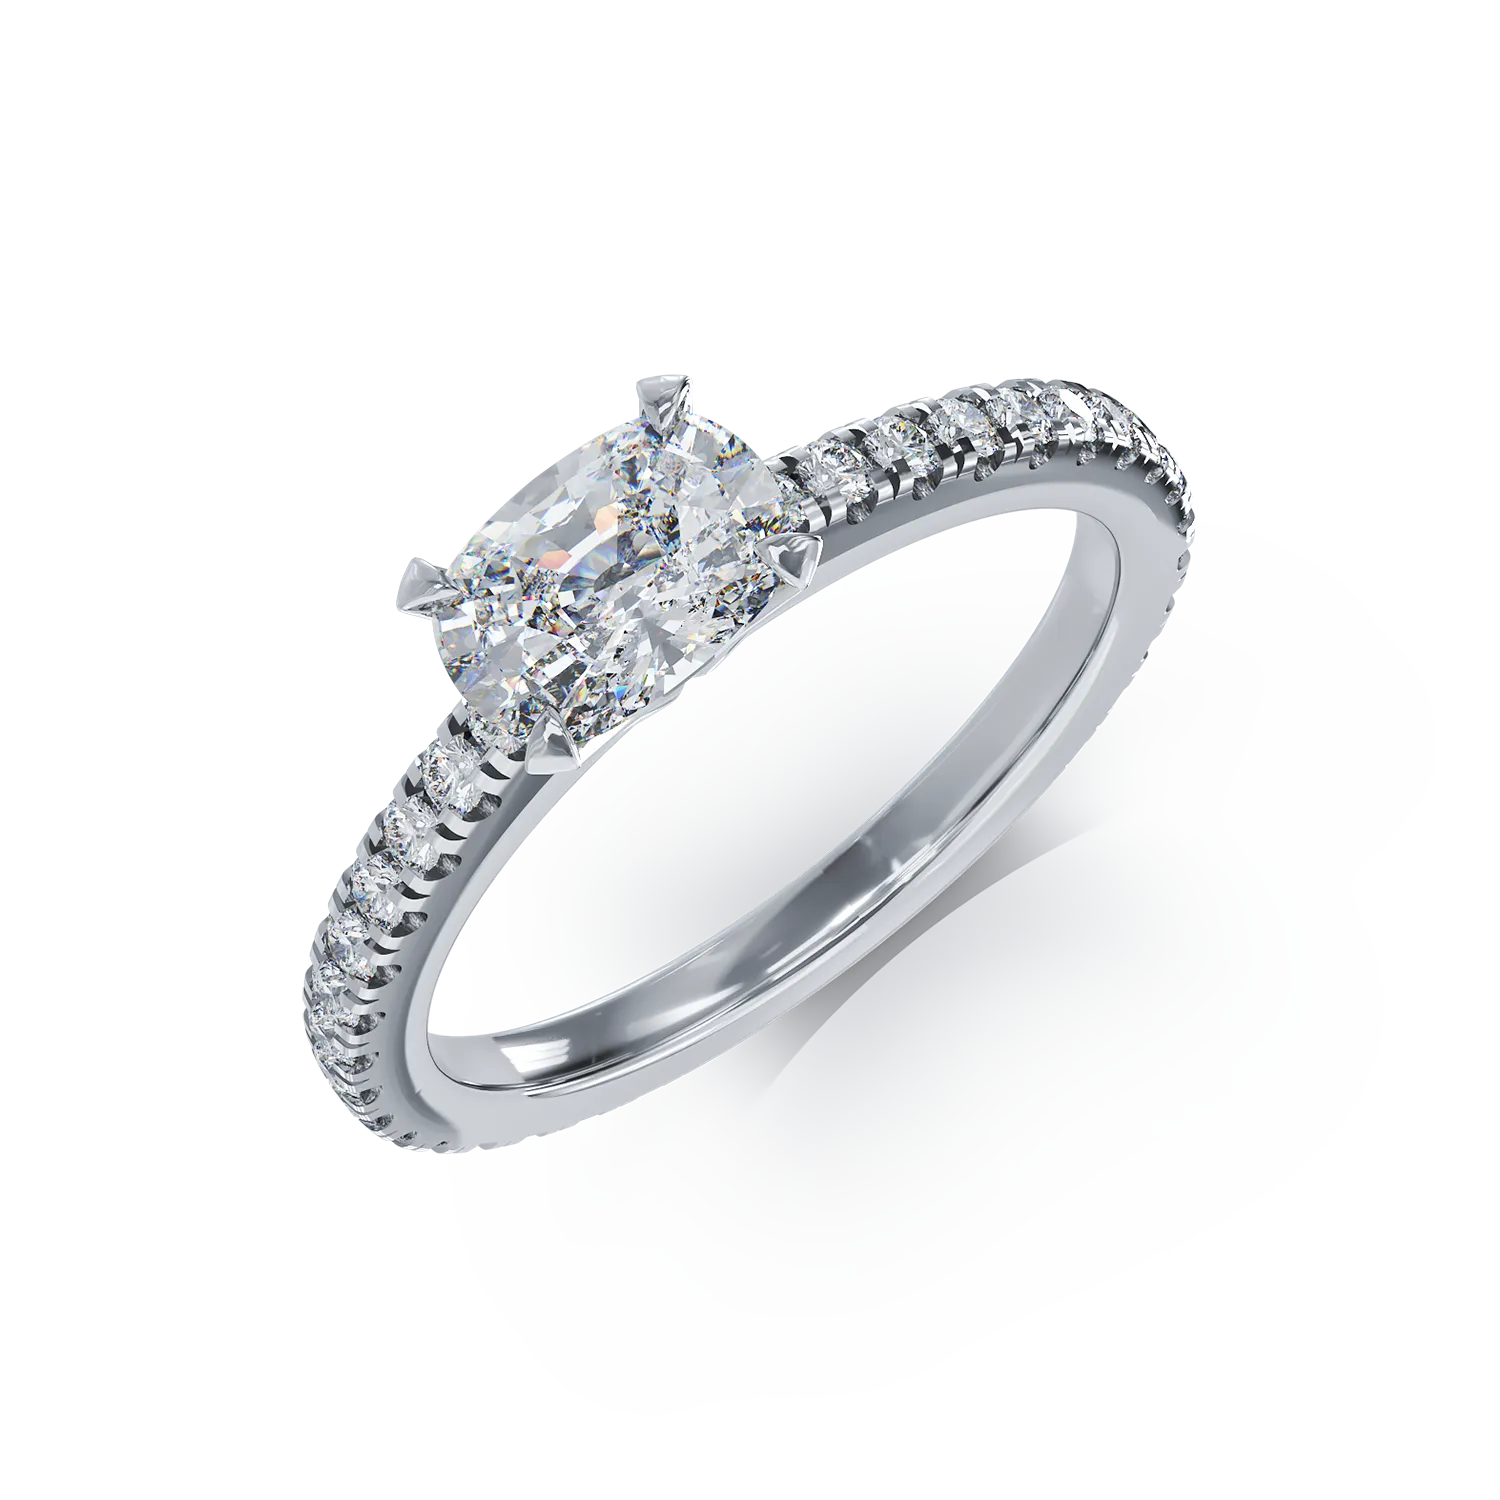 White gold engagement ring with 0.72ct diamond and 0.5ct diamonds